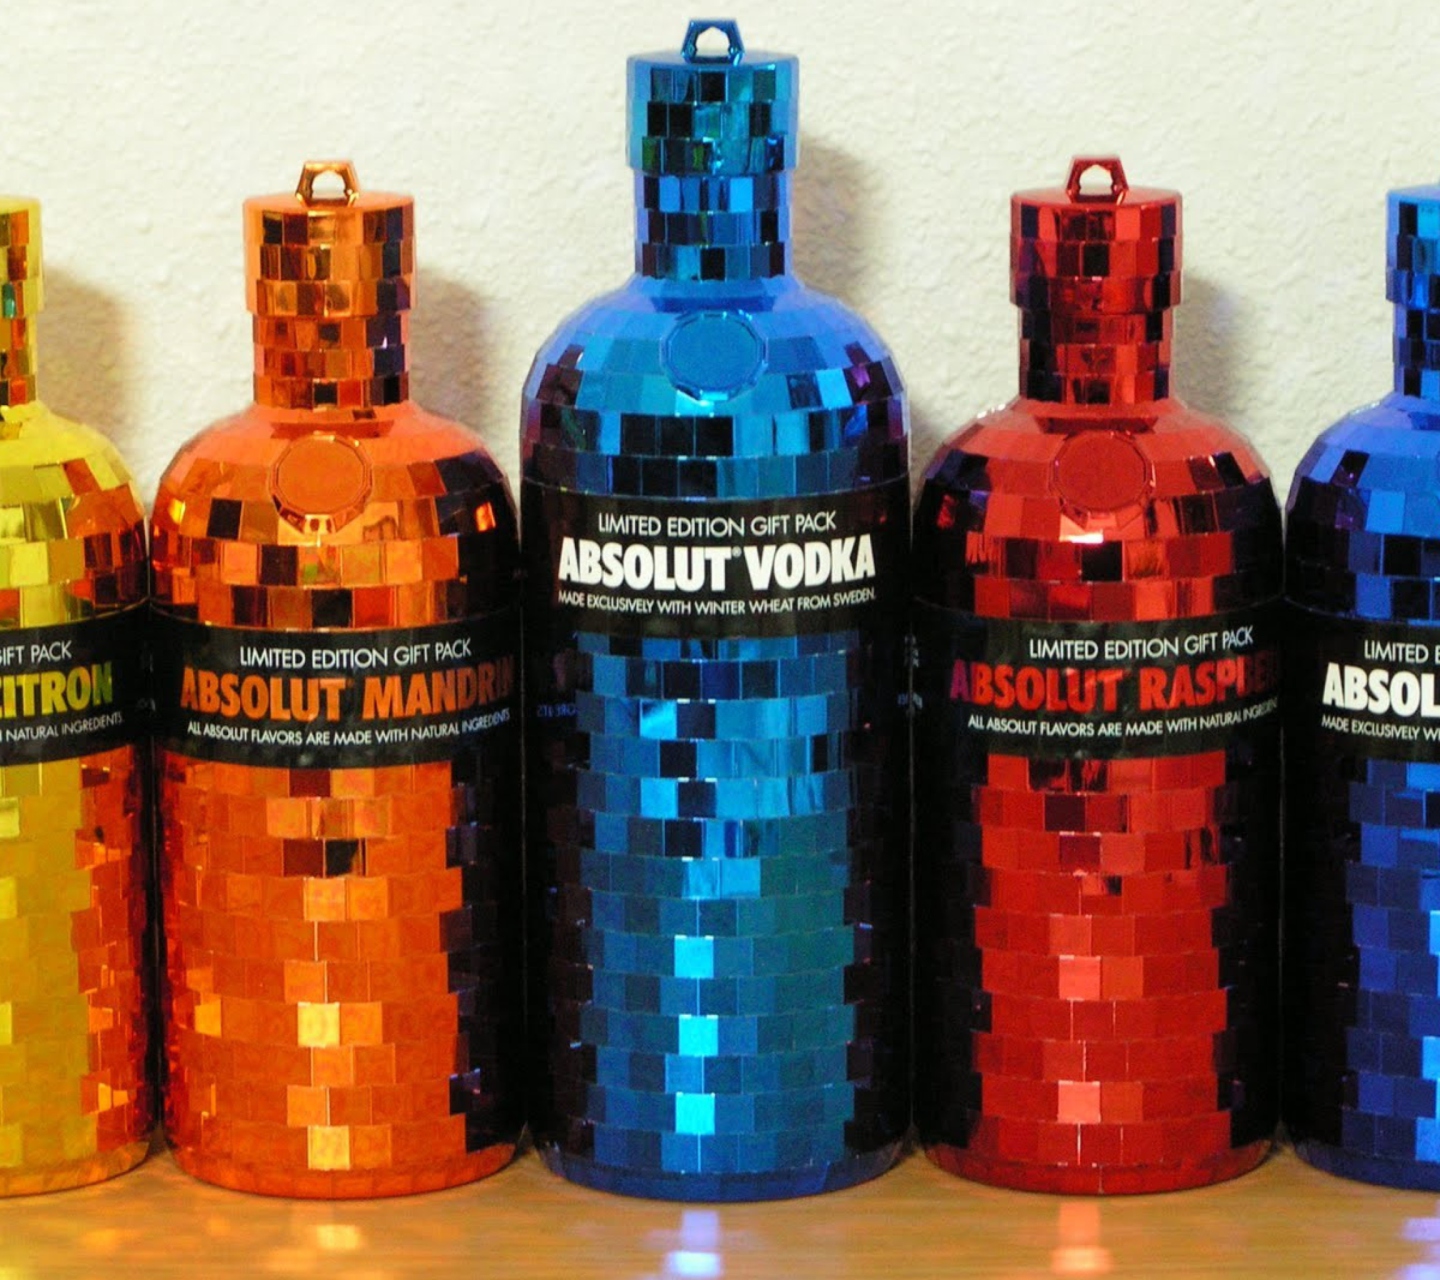 Absolut Vodka Limited Edition wallpaper 1440x1280